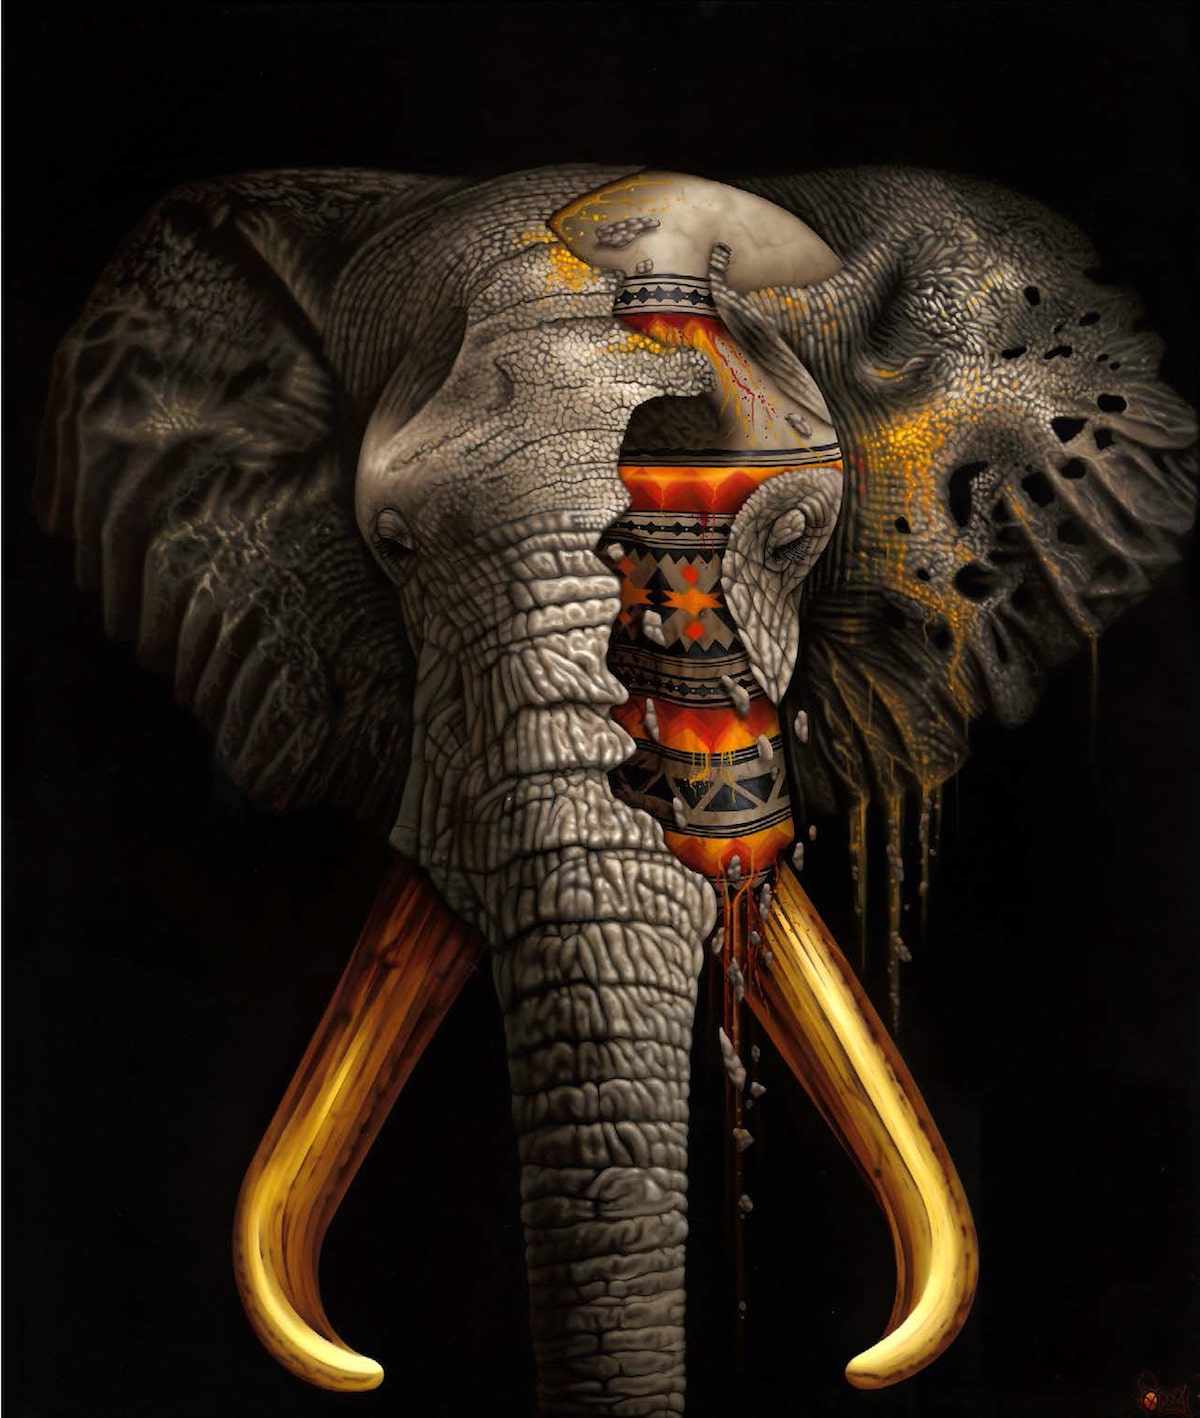 Animal Paintings by Sonny Help Raise Awareness for Endangered Species